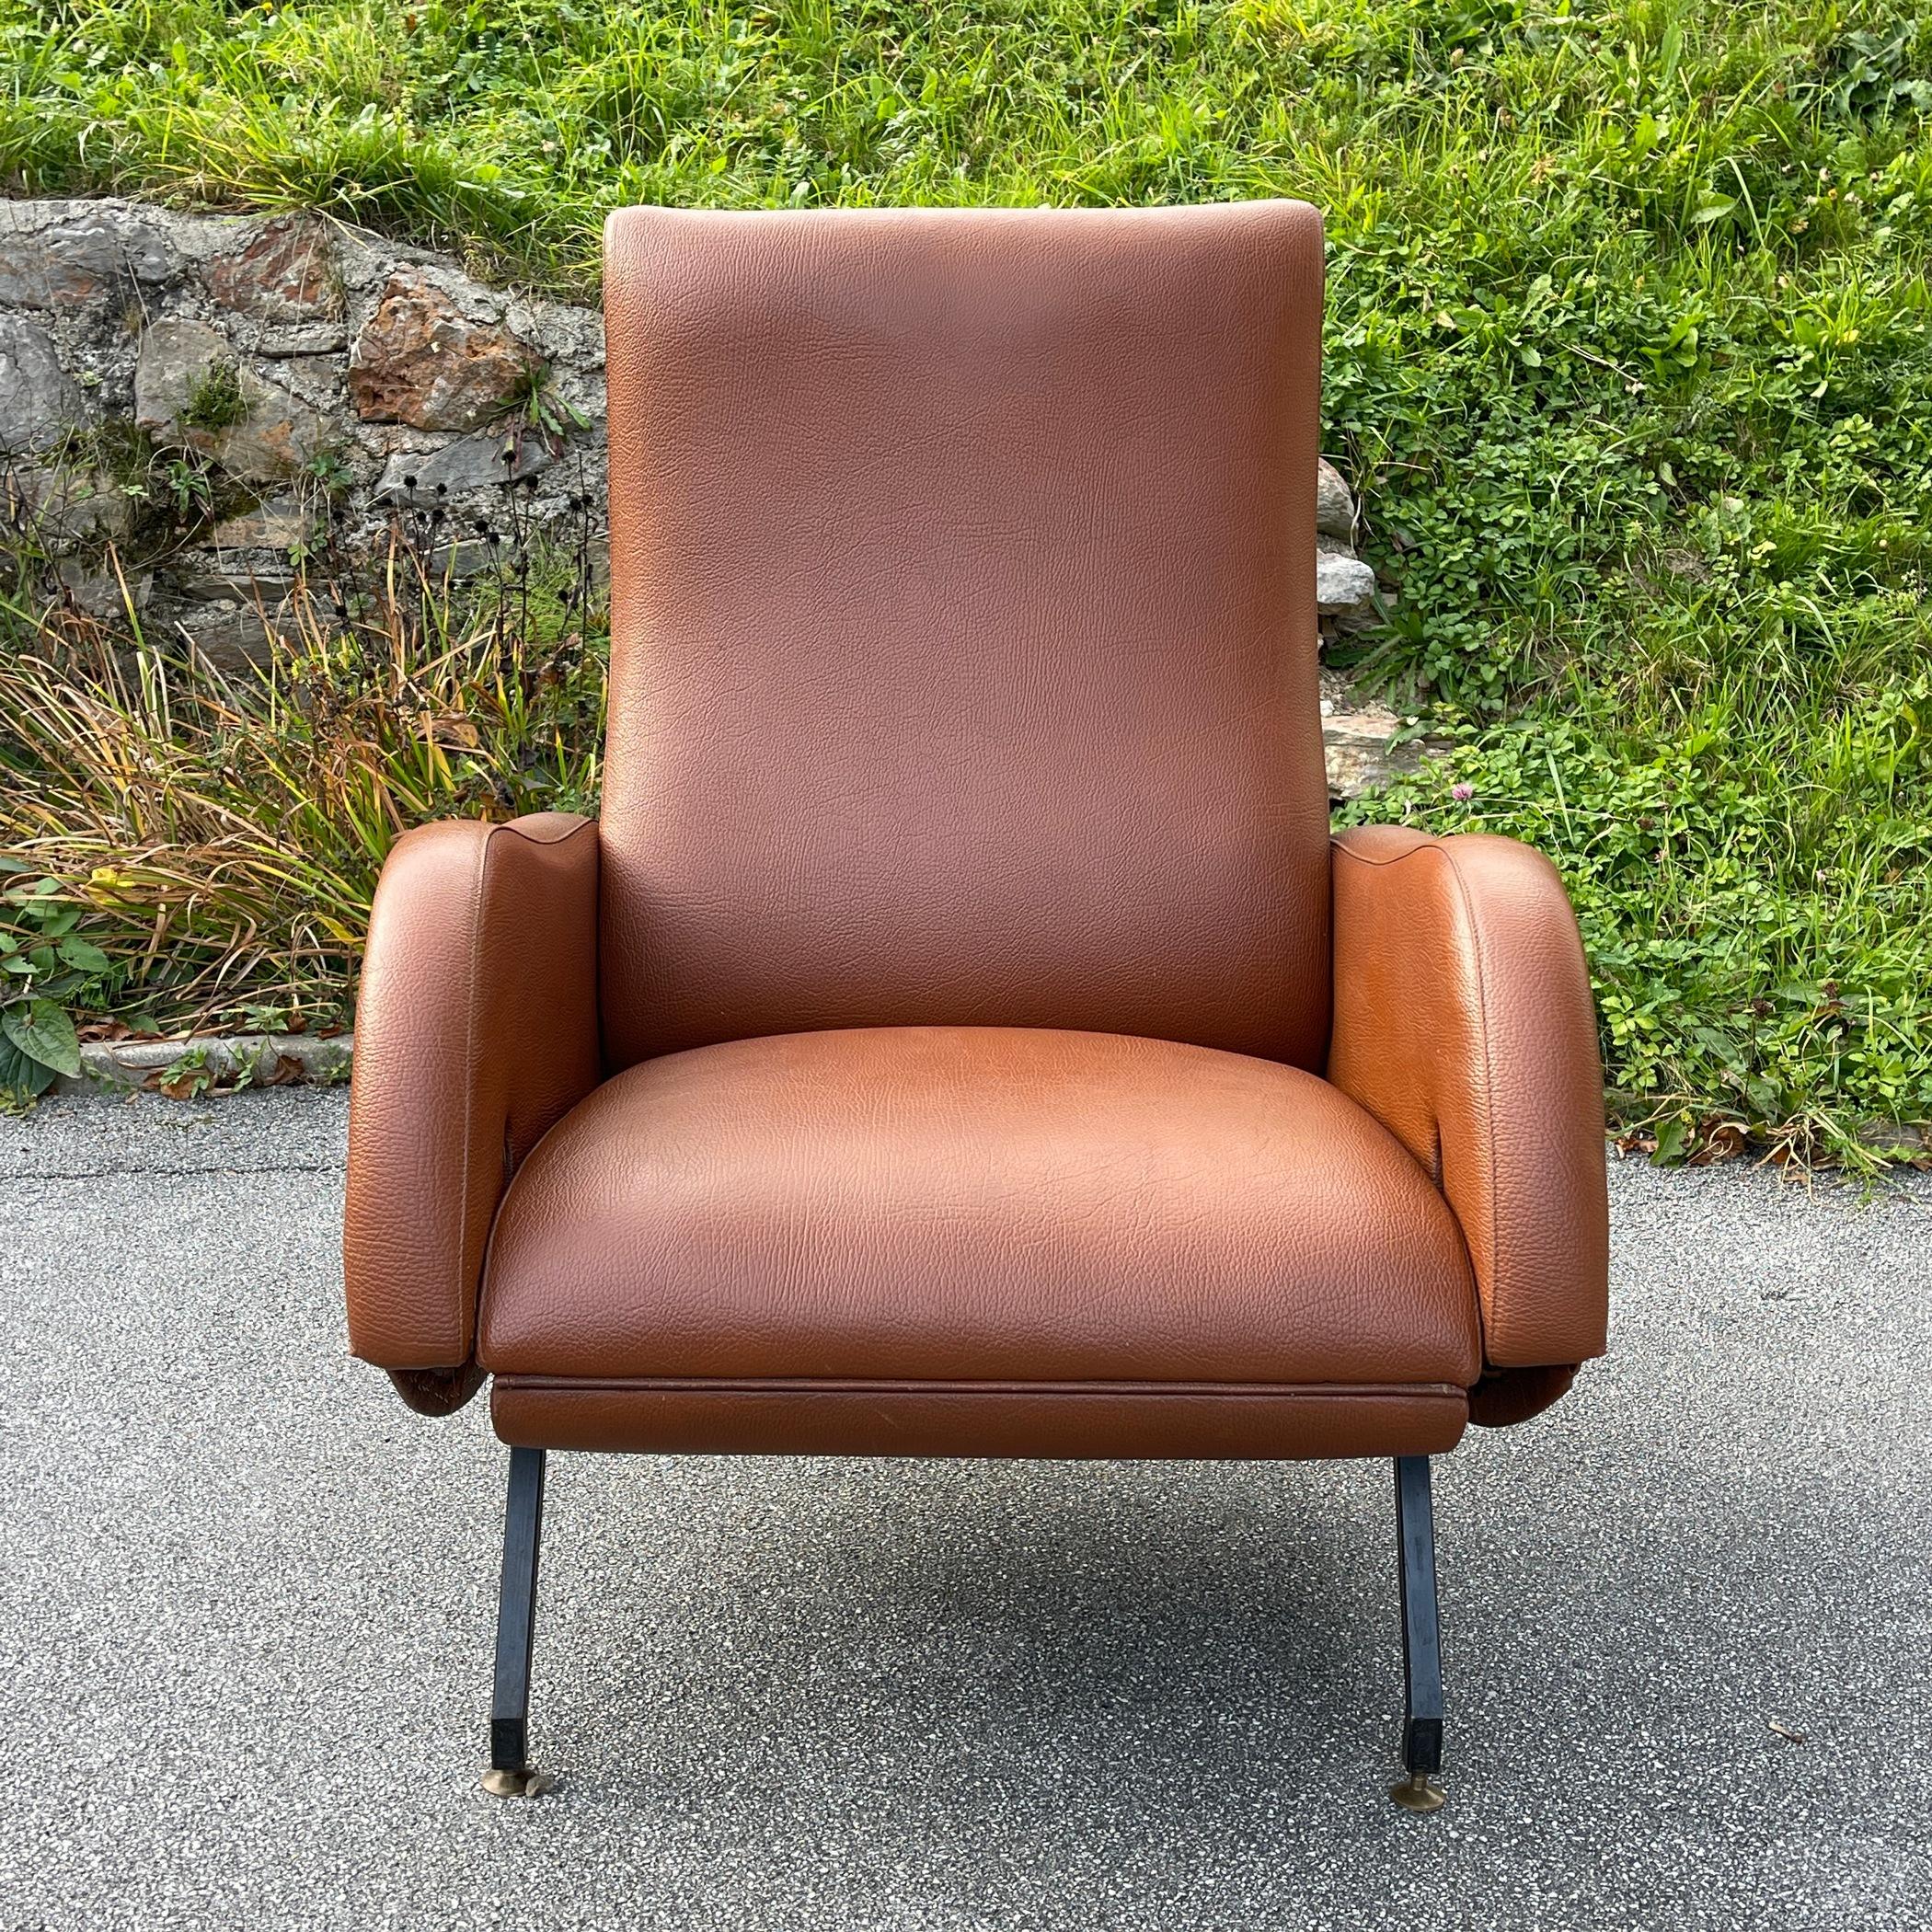 Original leatherette upholstery and featuring a durable hardwood frame with steel legs and adjustable brass ferrules, it's easy to see why this piece is a coveted classic. Not only is it uniquely stylish, it's super comfortable, with a reclining